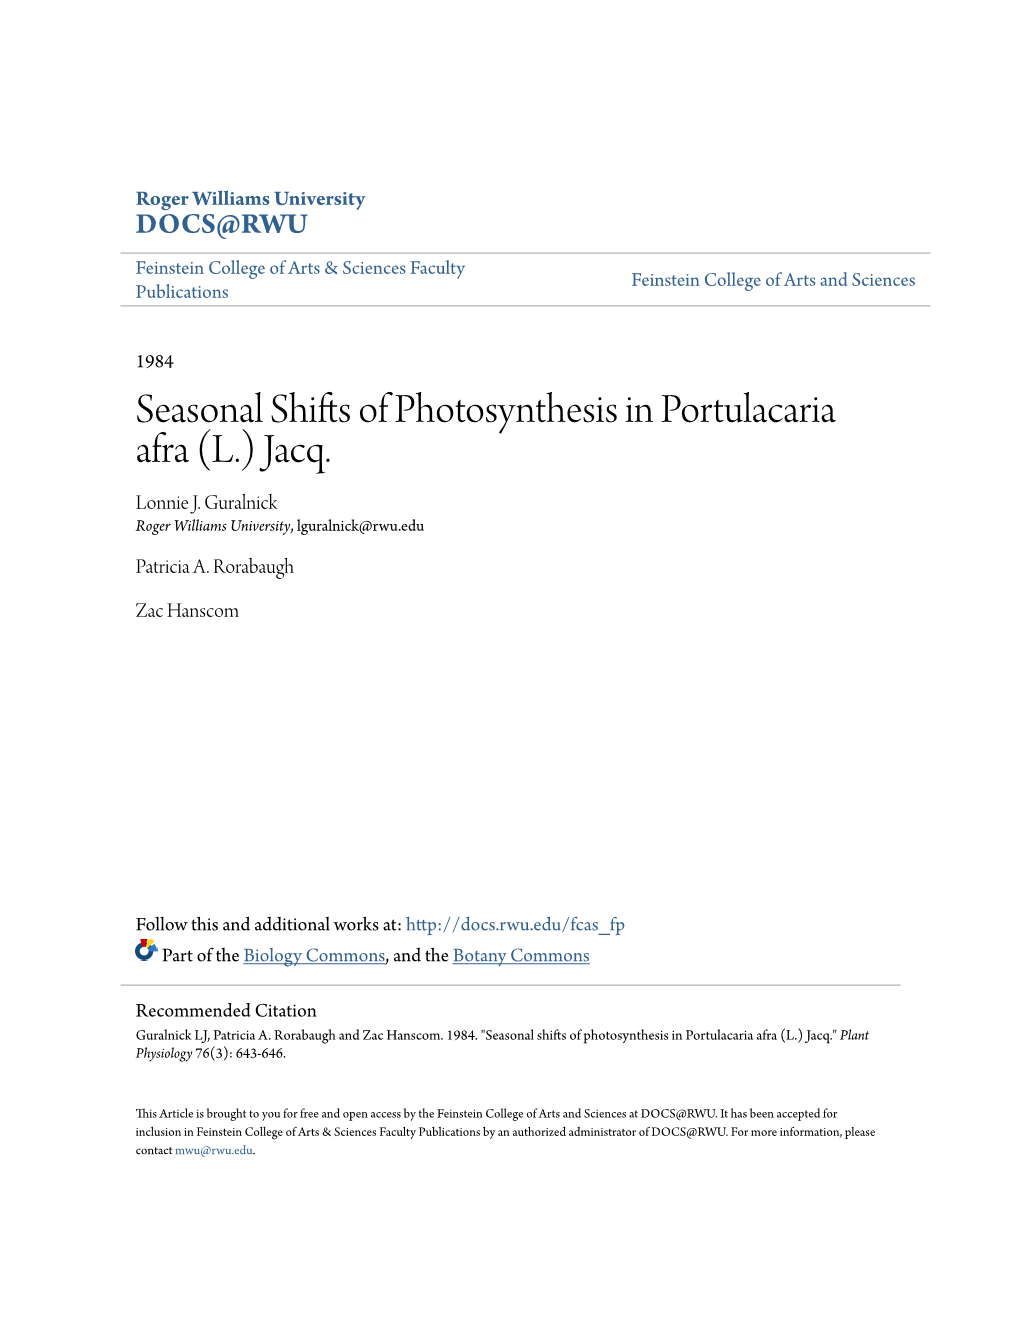 Seasonal Shifts of Photosynthesis in Portulacaria Afra (L.) Jacq